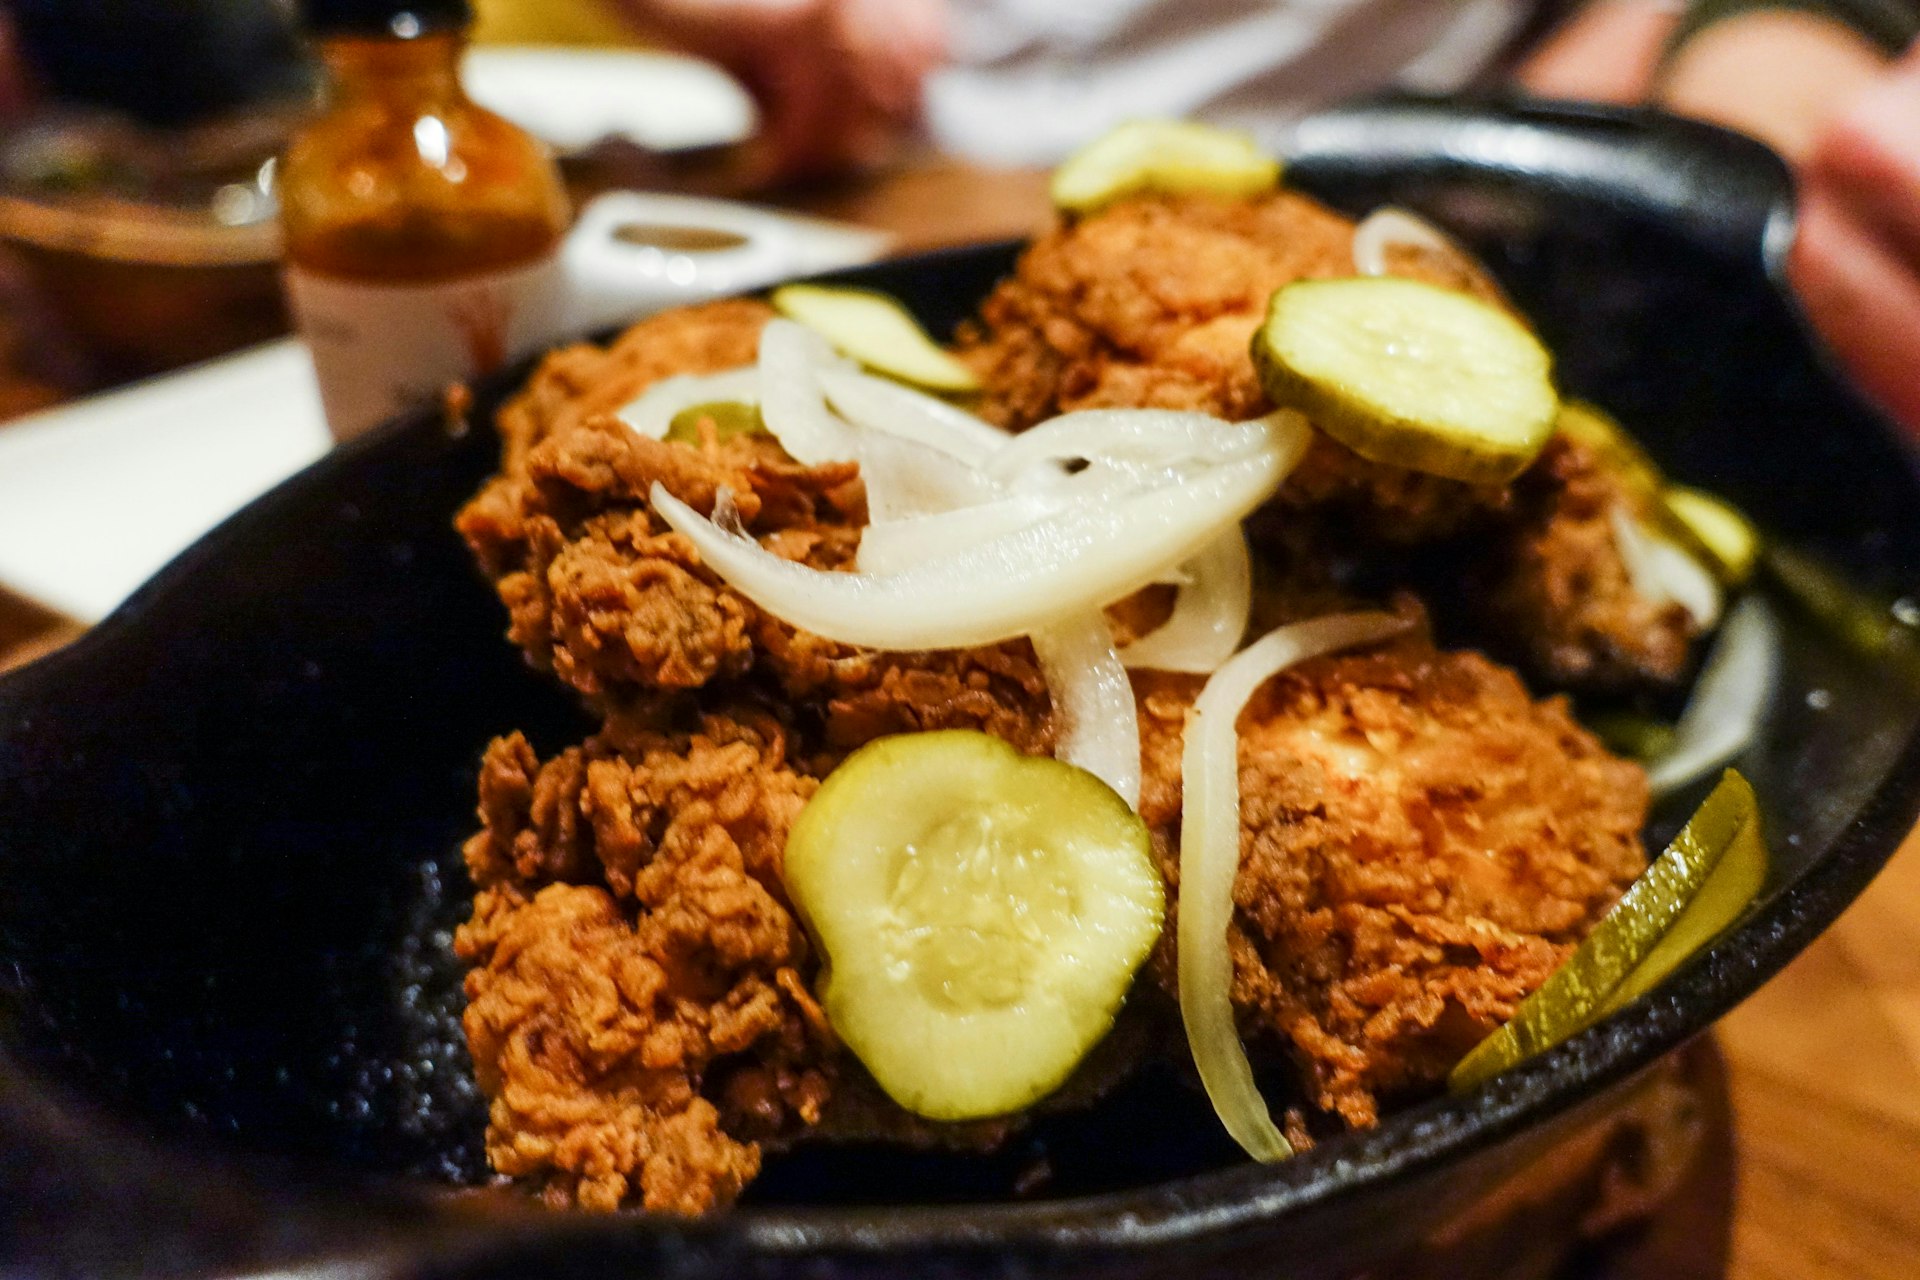 A plate of fried chicken at Imperial. Image by Flash Parker / Lonely Planet